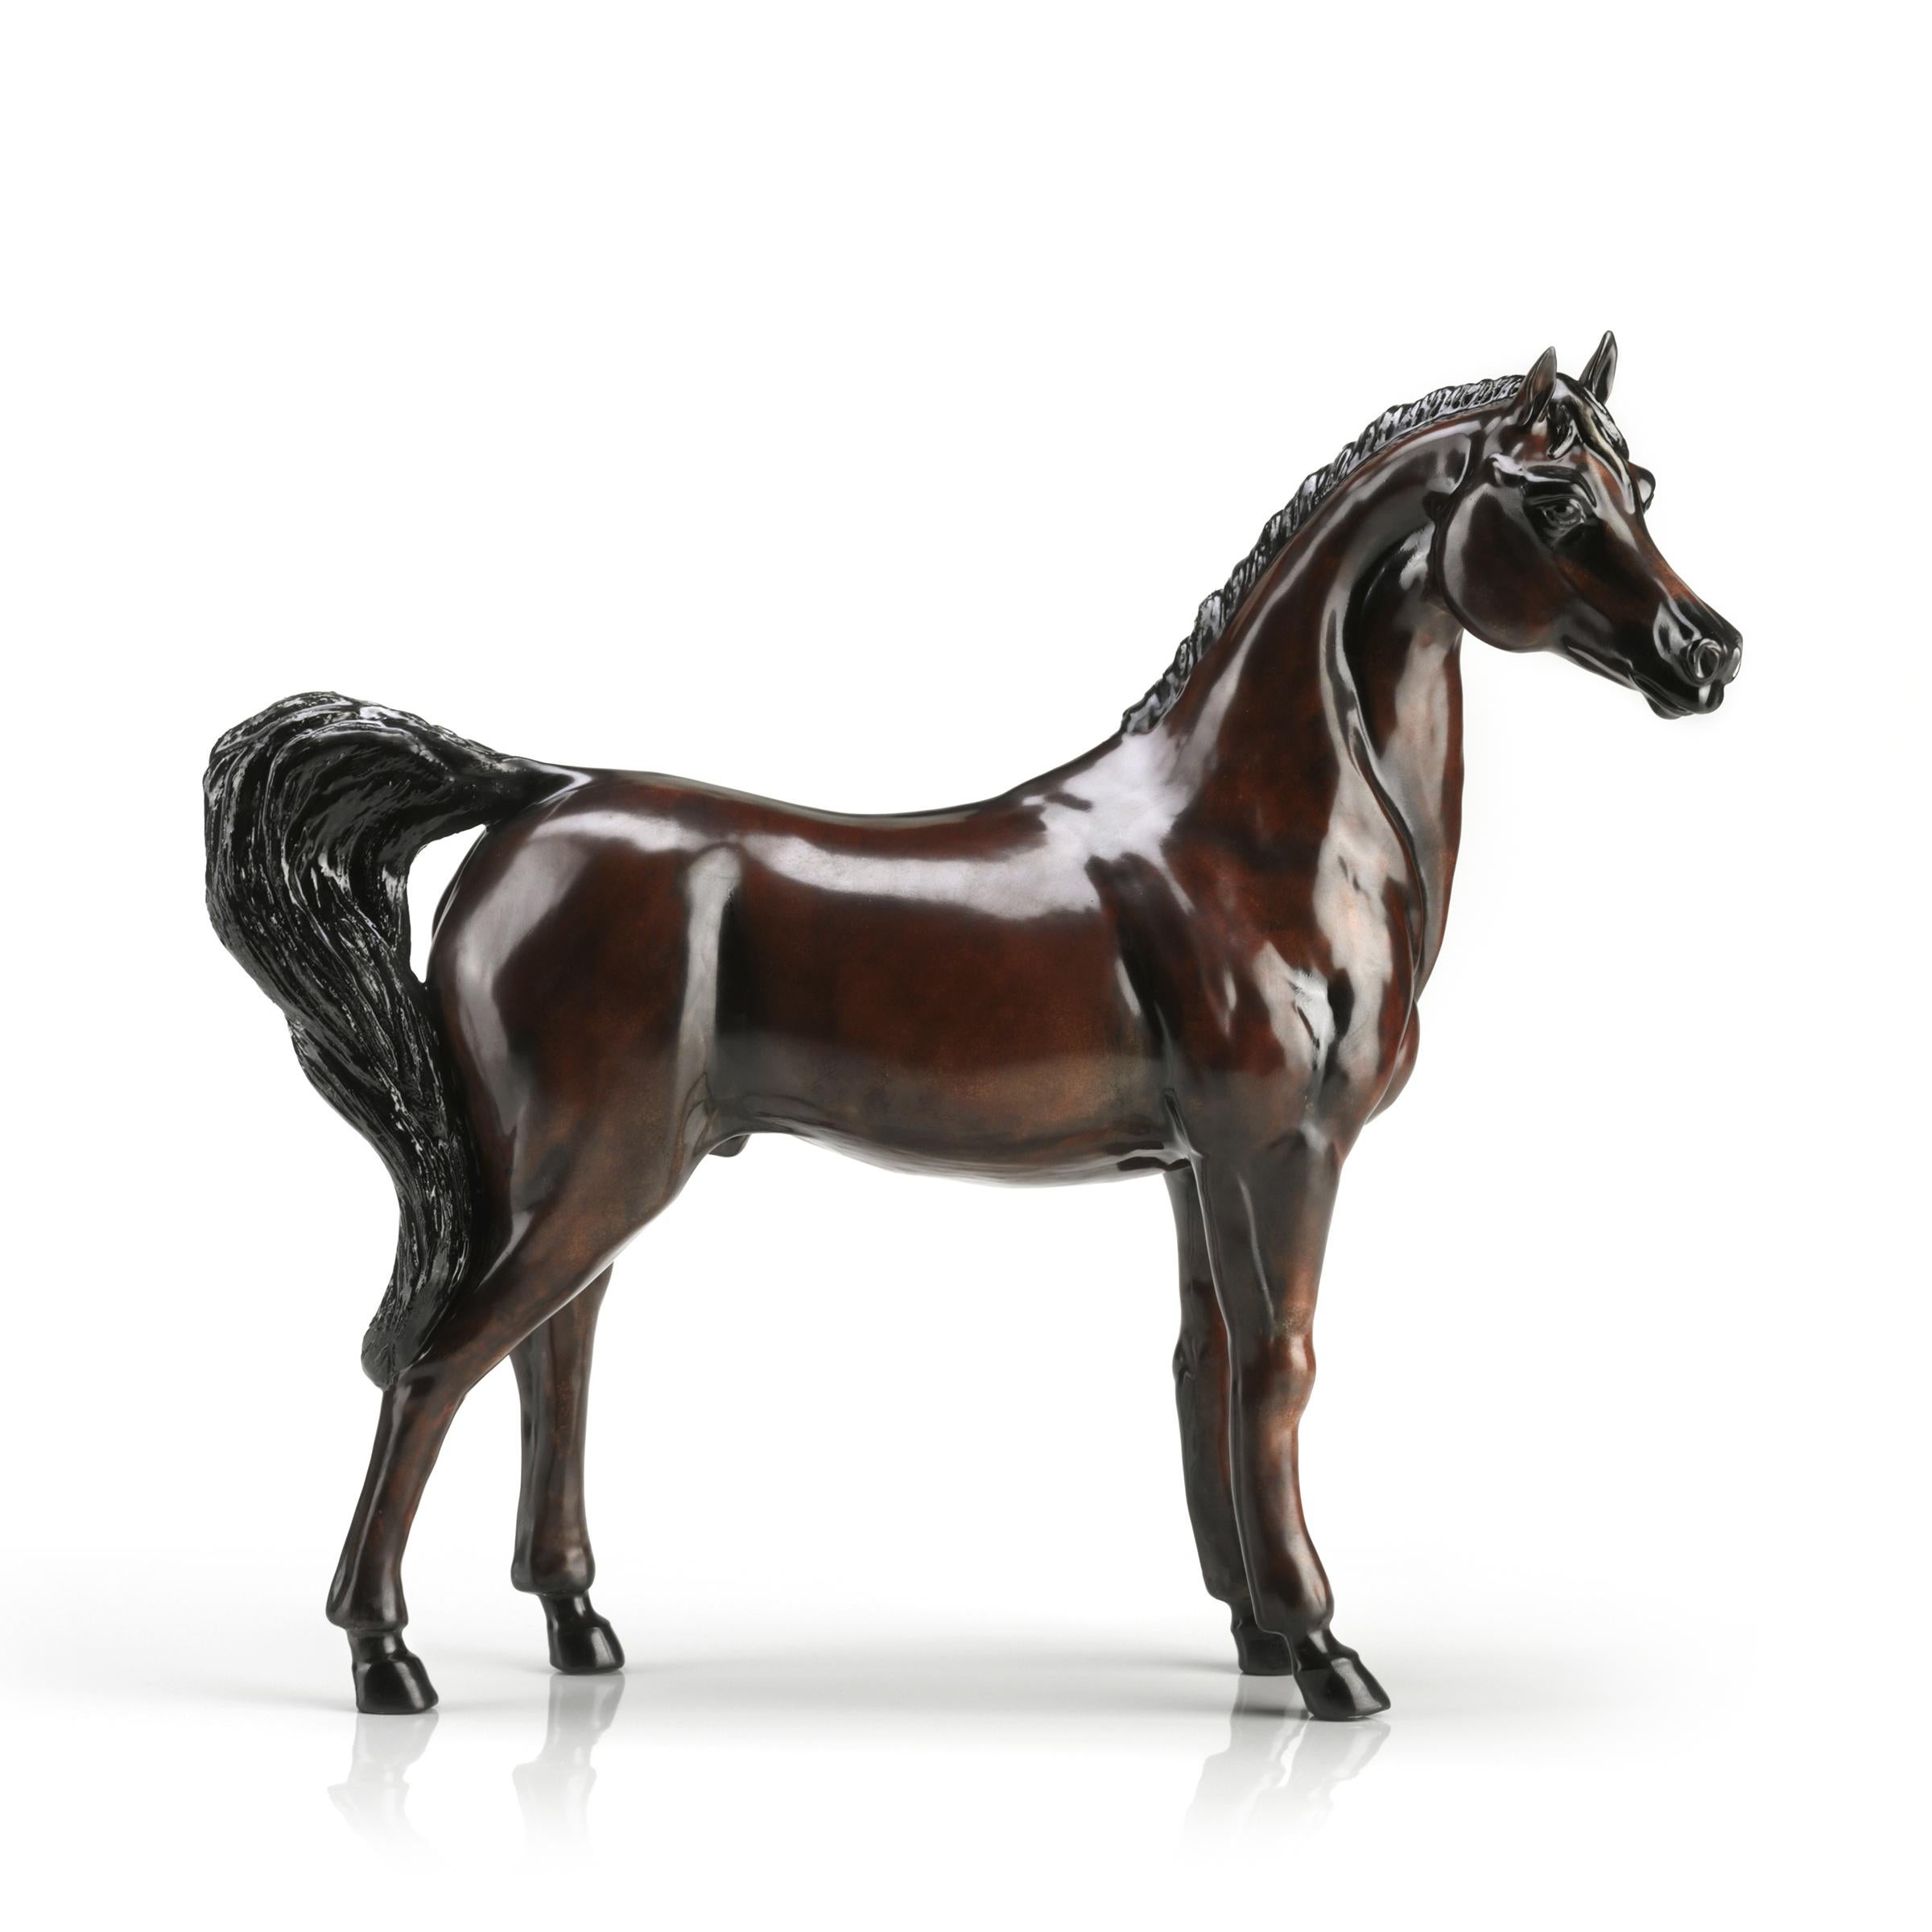 Sculpture pure bred horse all made in
hand painted porcelain. Exceptional piece.